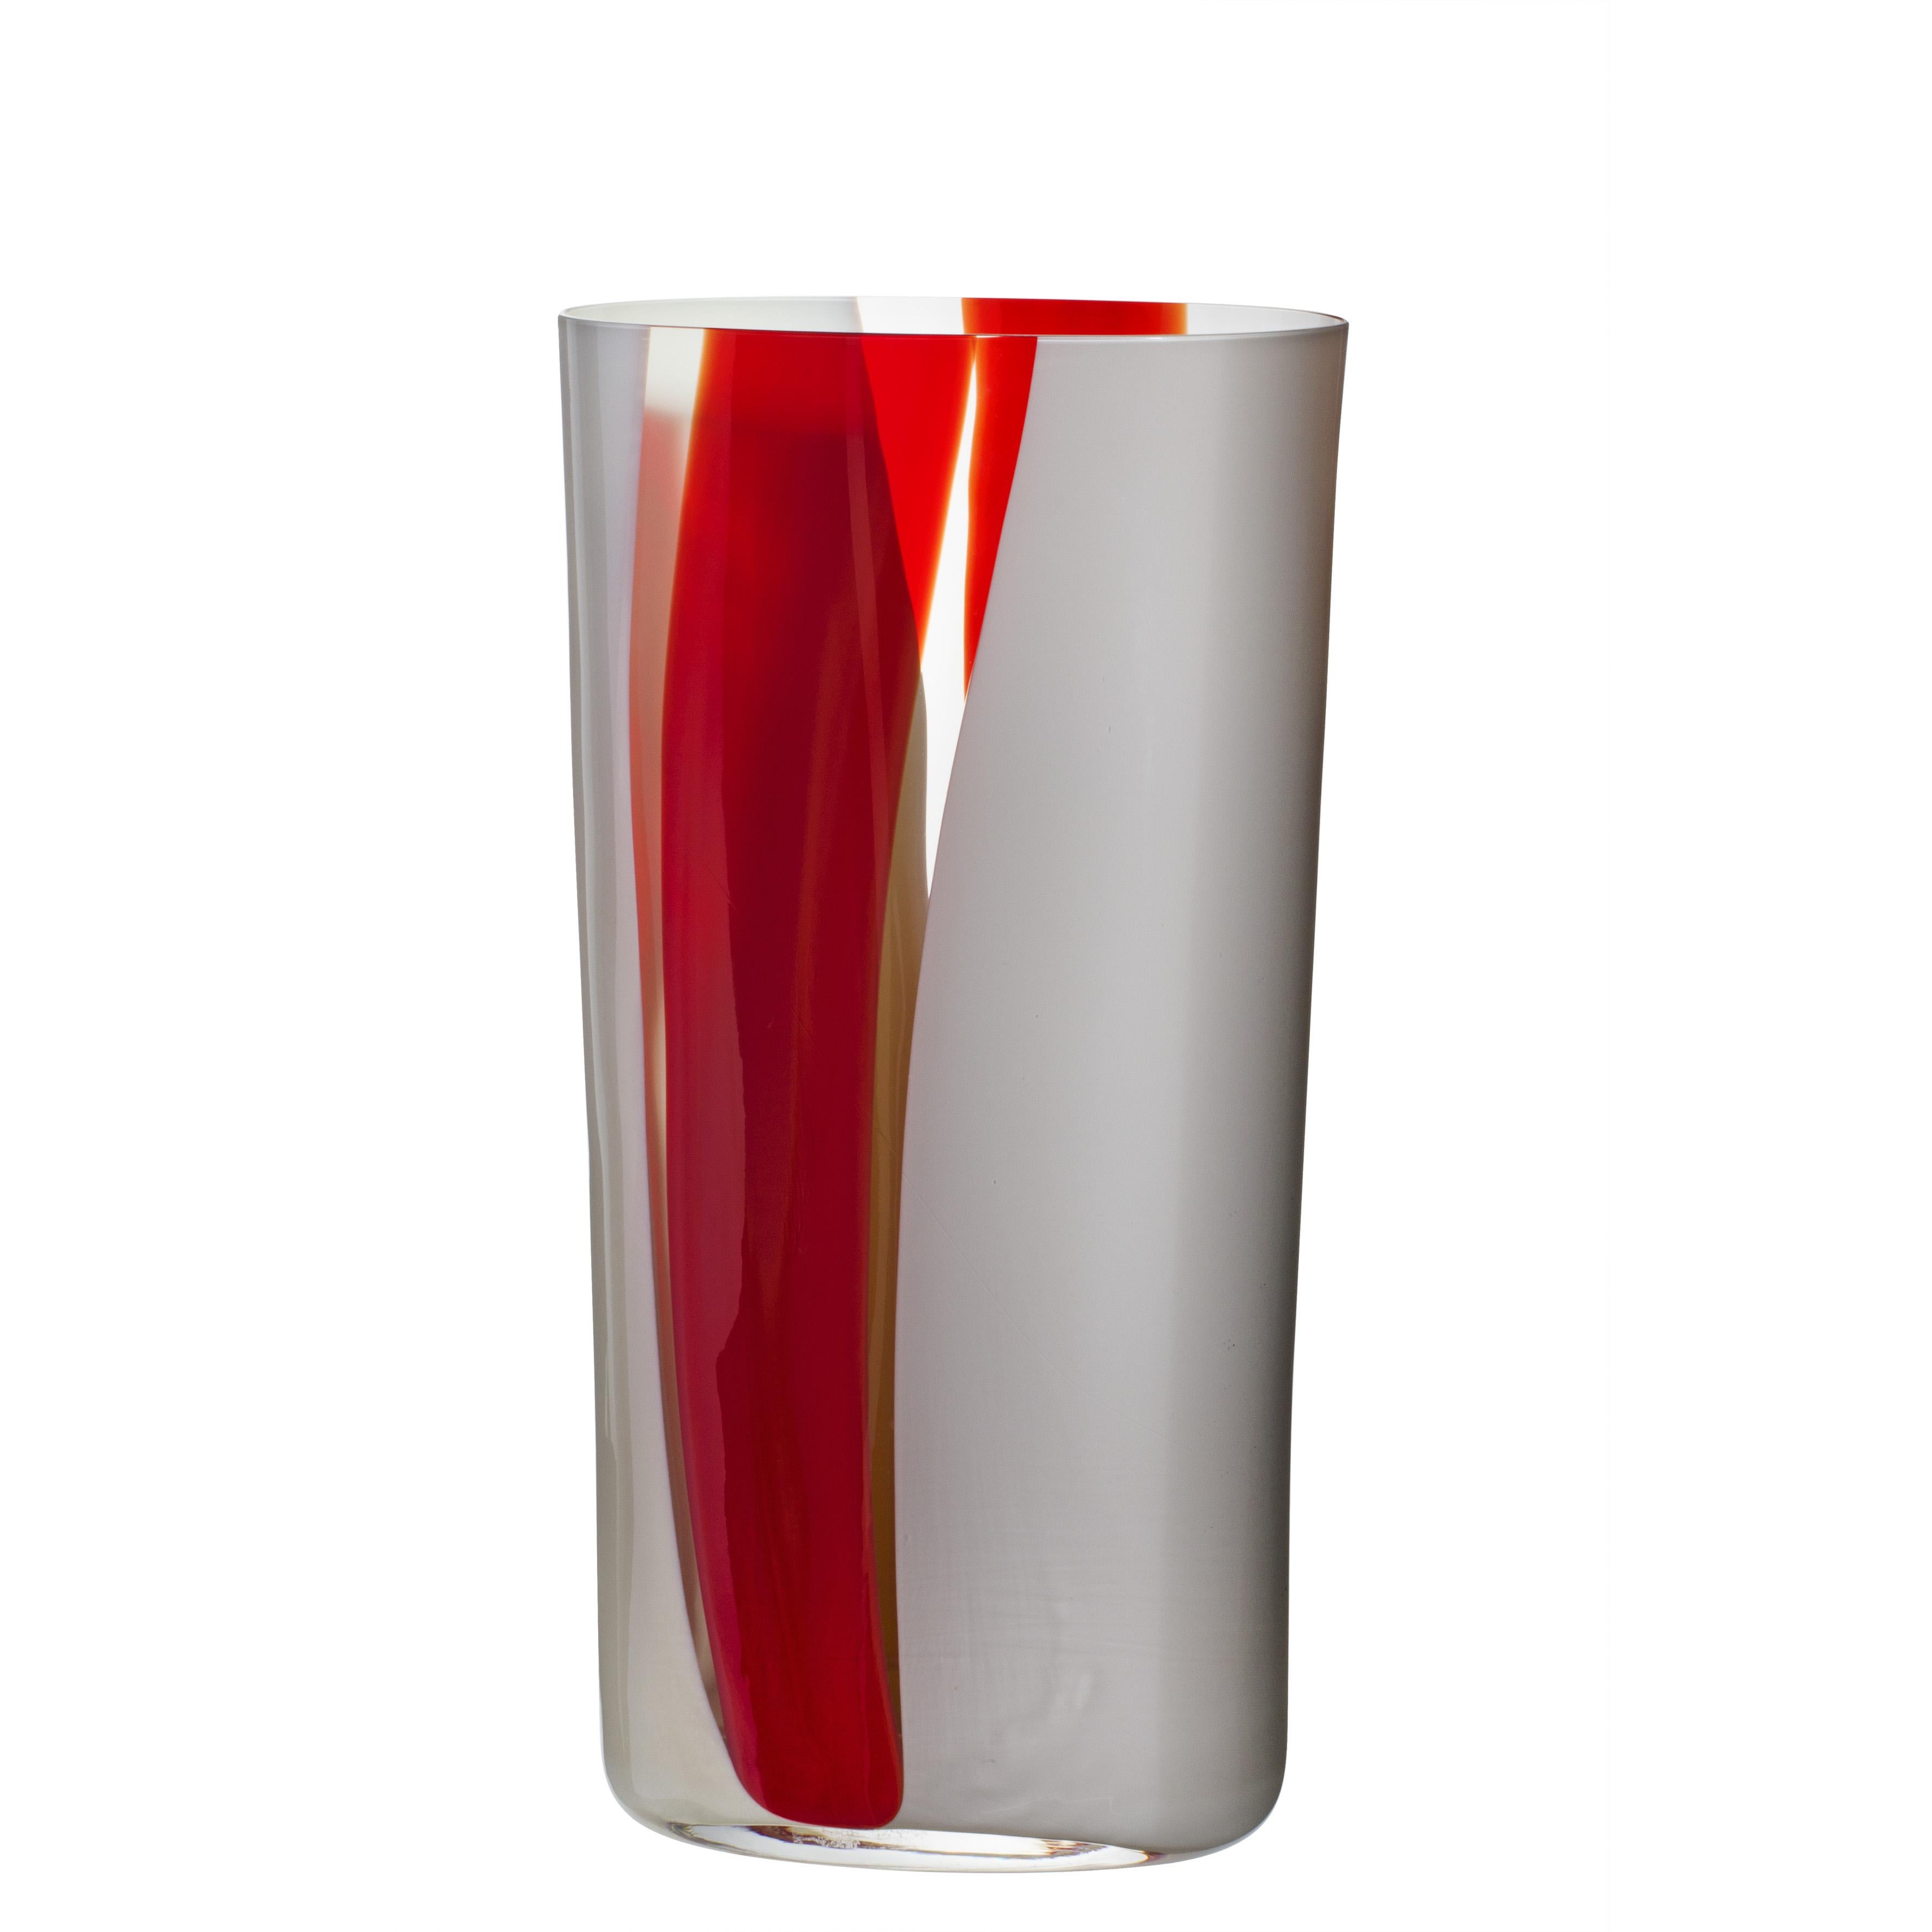 Large Ovale Vase in Red, White, and Grey by Carlo Moretti For Sale